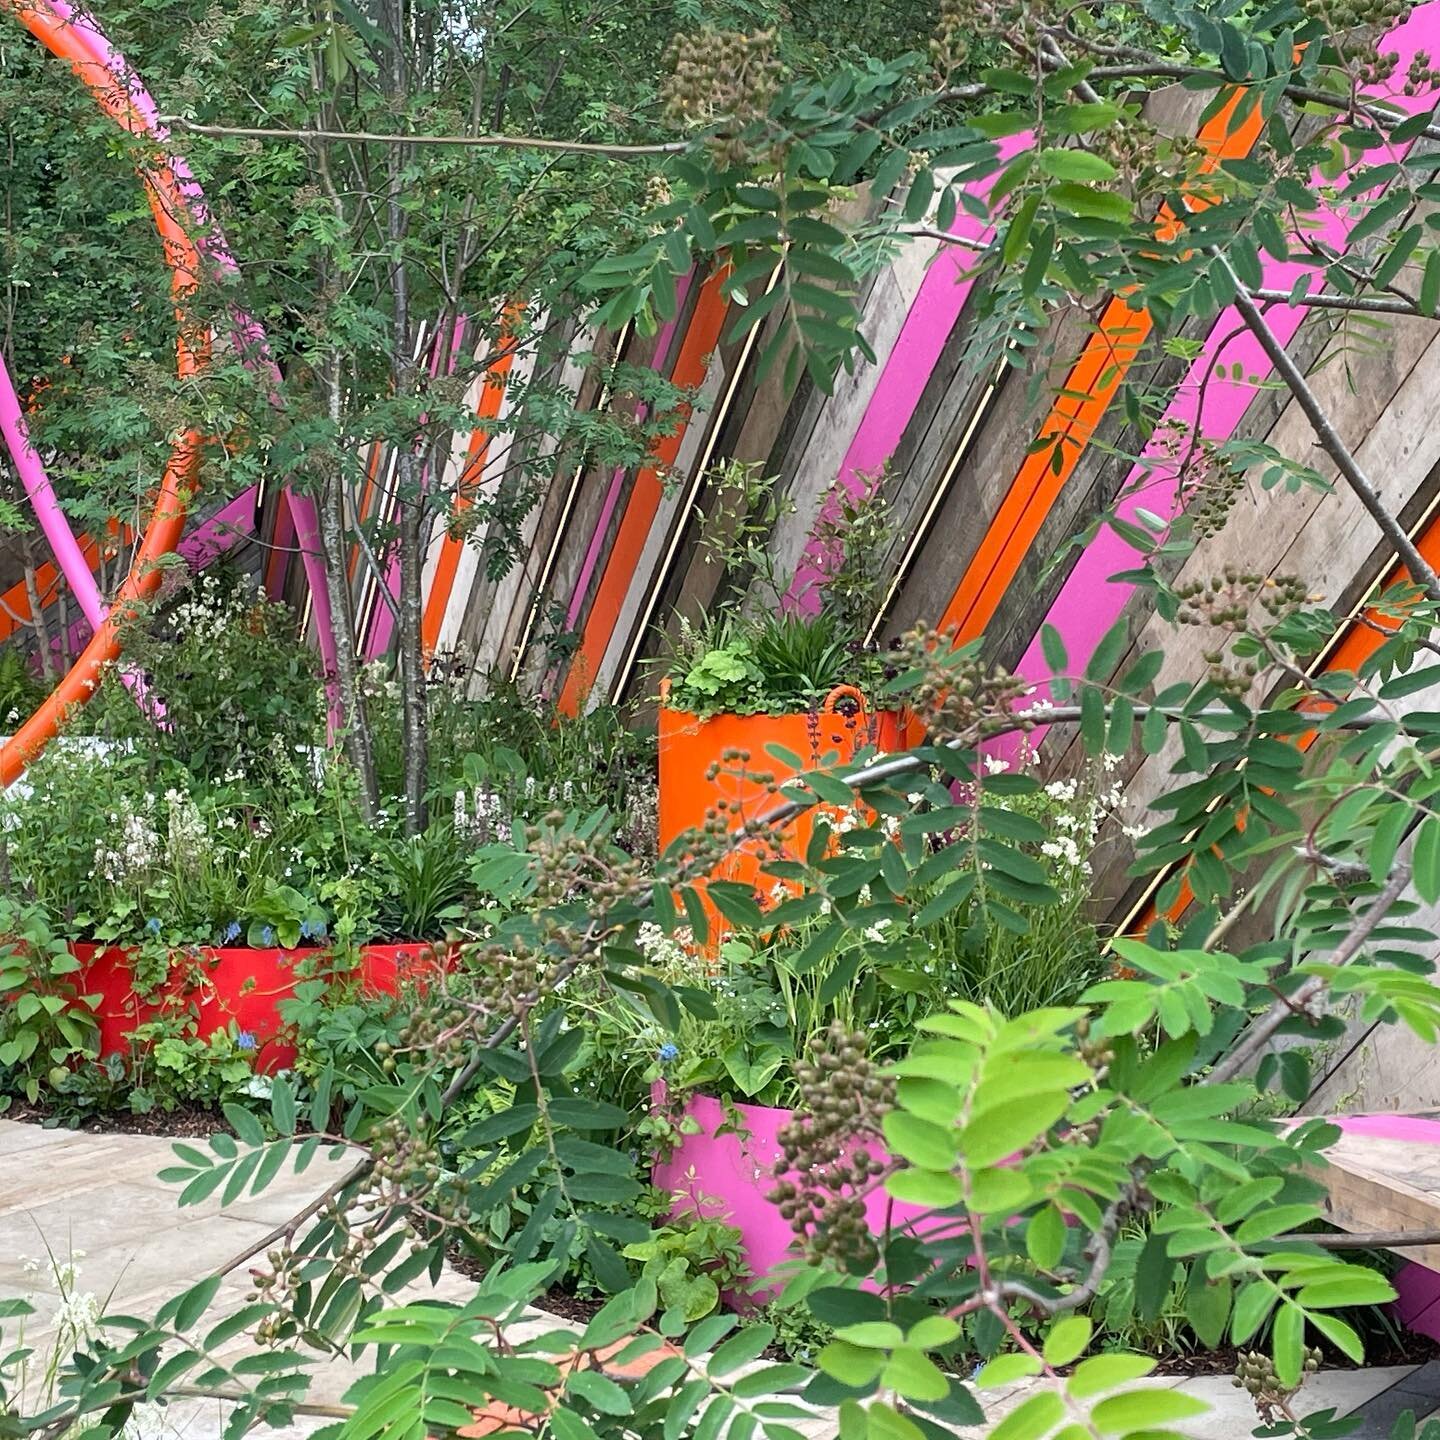 Well obviously this beautiful stripey garden has caught my eye at the  Chelsea Flower Show! 🙌🙌🌈🌈@rhschelsea @stmungos